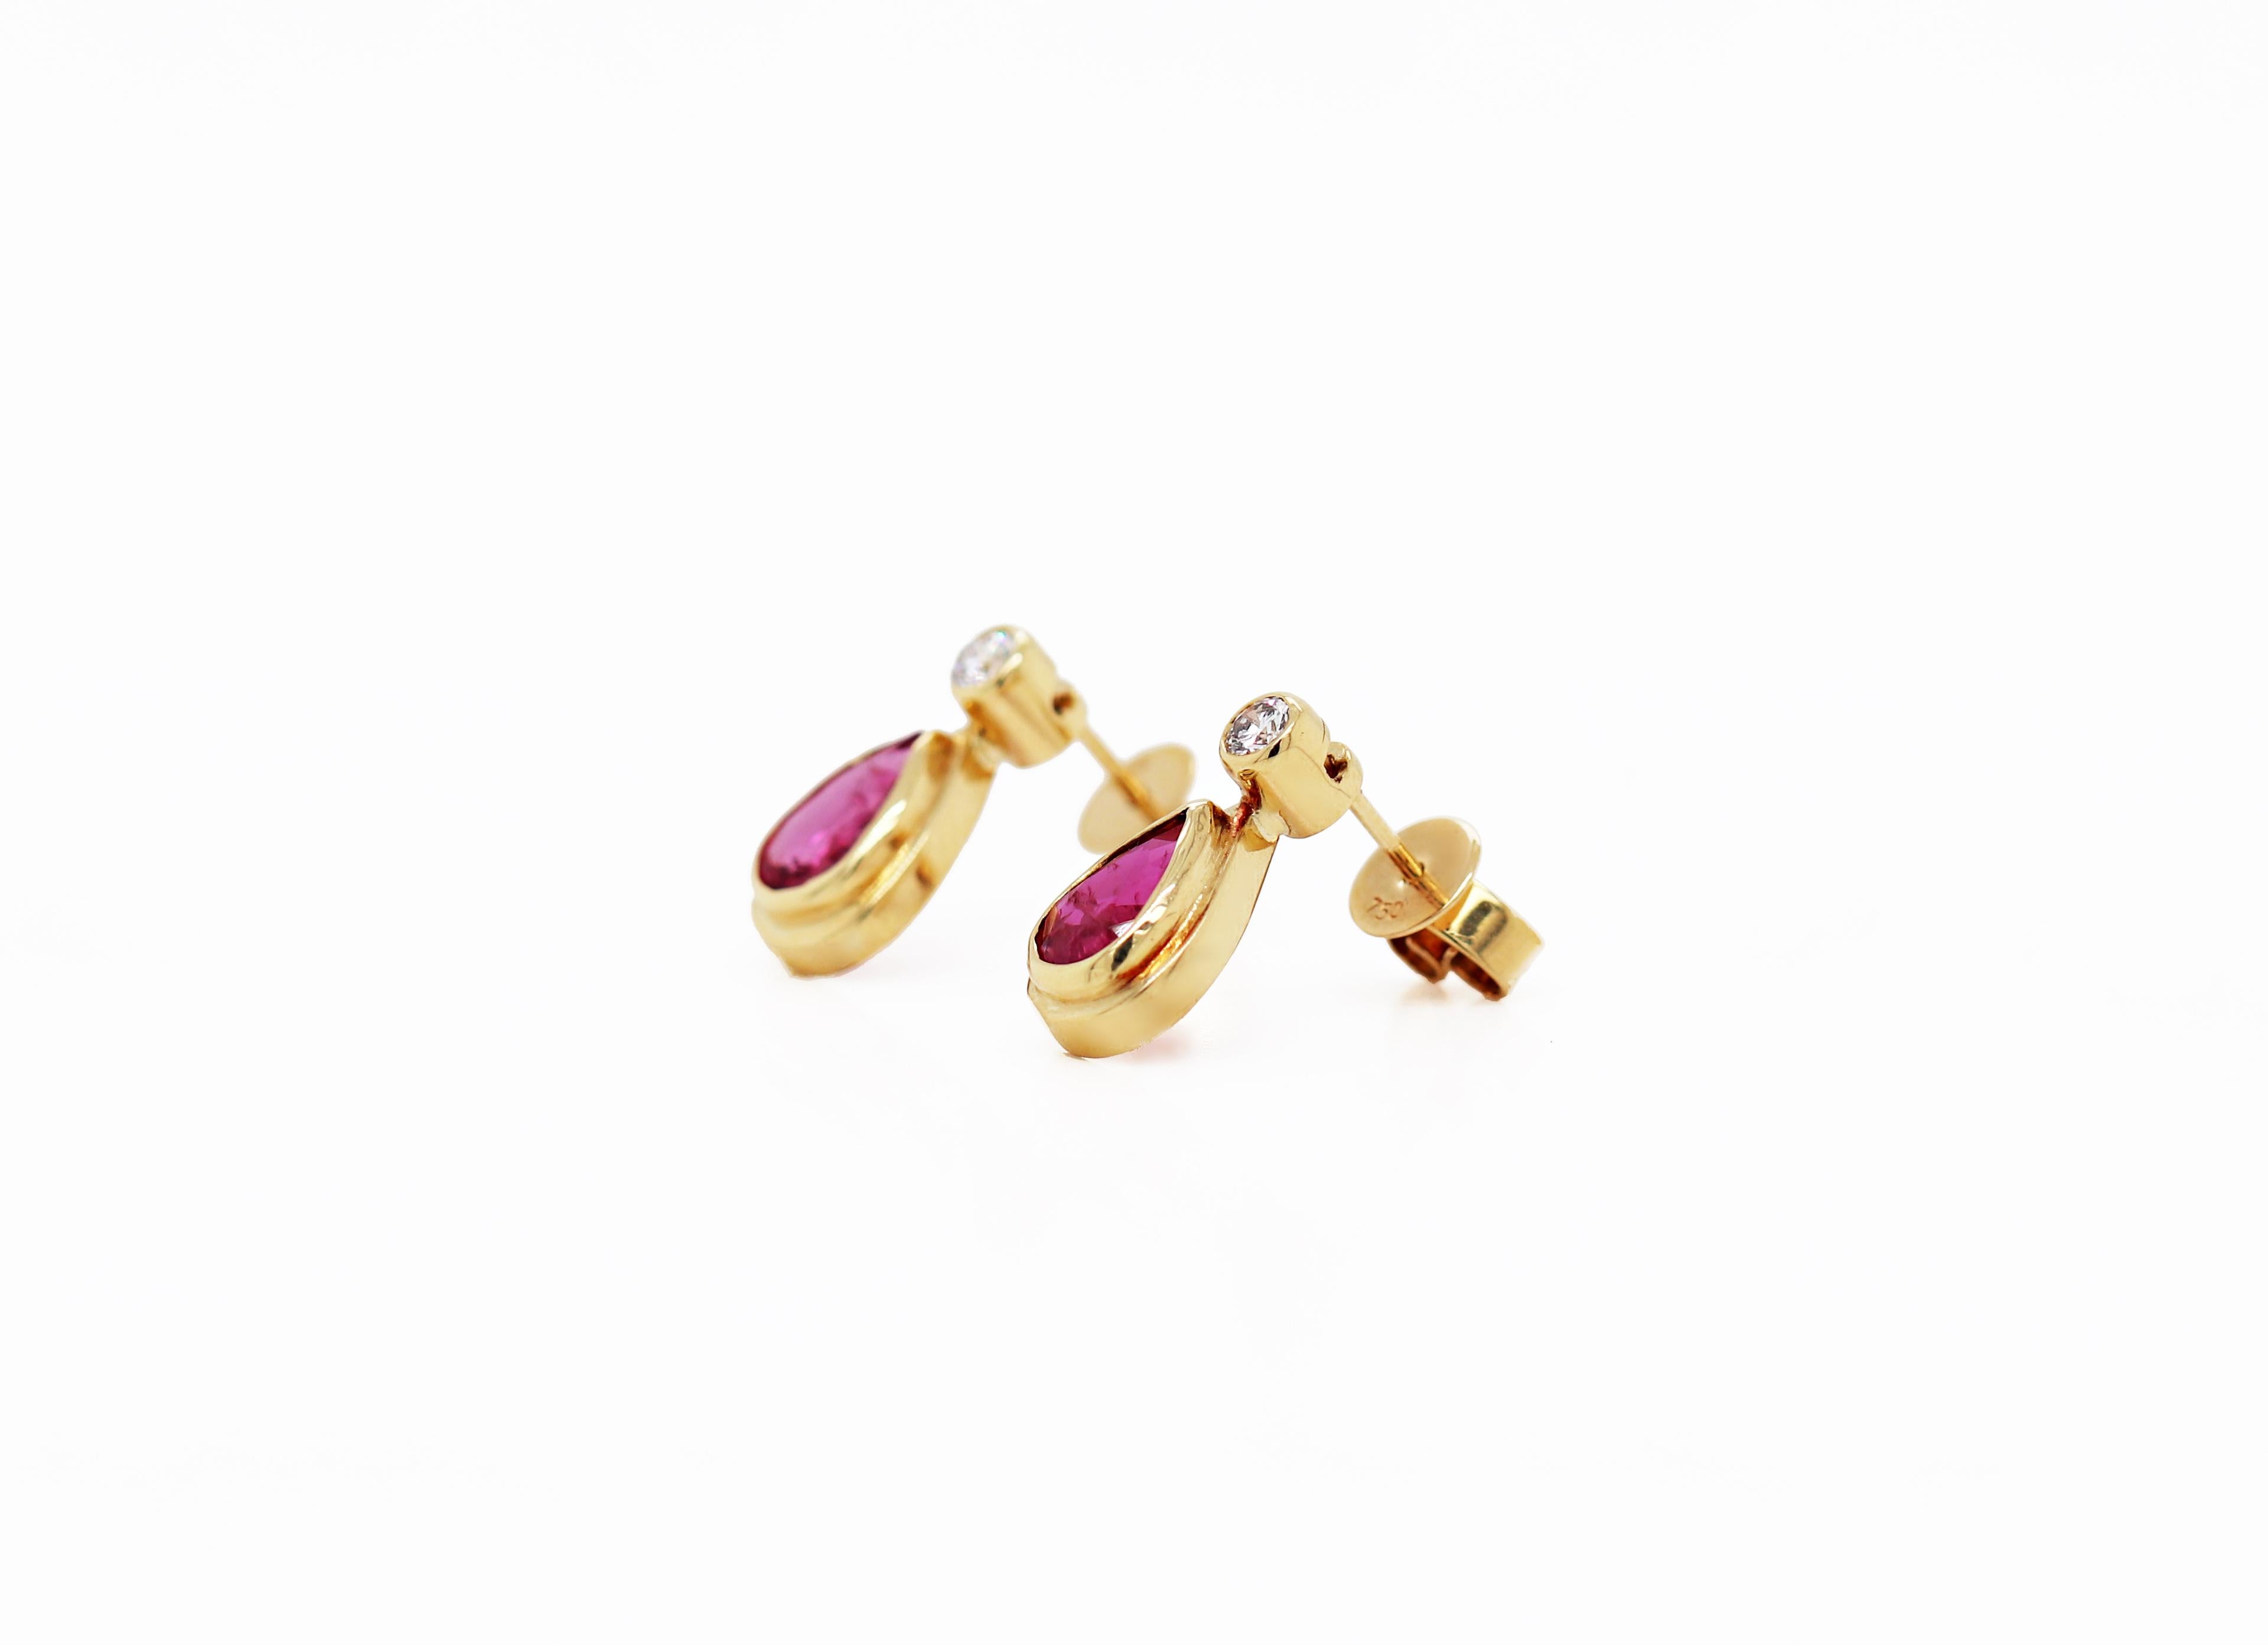 These beautiful earrings feature a vibrant pear shaped ruby weighing approximately 1.05ct each, mounted in a rub over, open back setting. The ruby is wonderfully accompanied by a fine quality round brilliant cut diamond above it, weighing